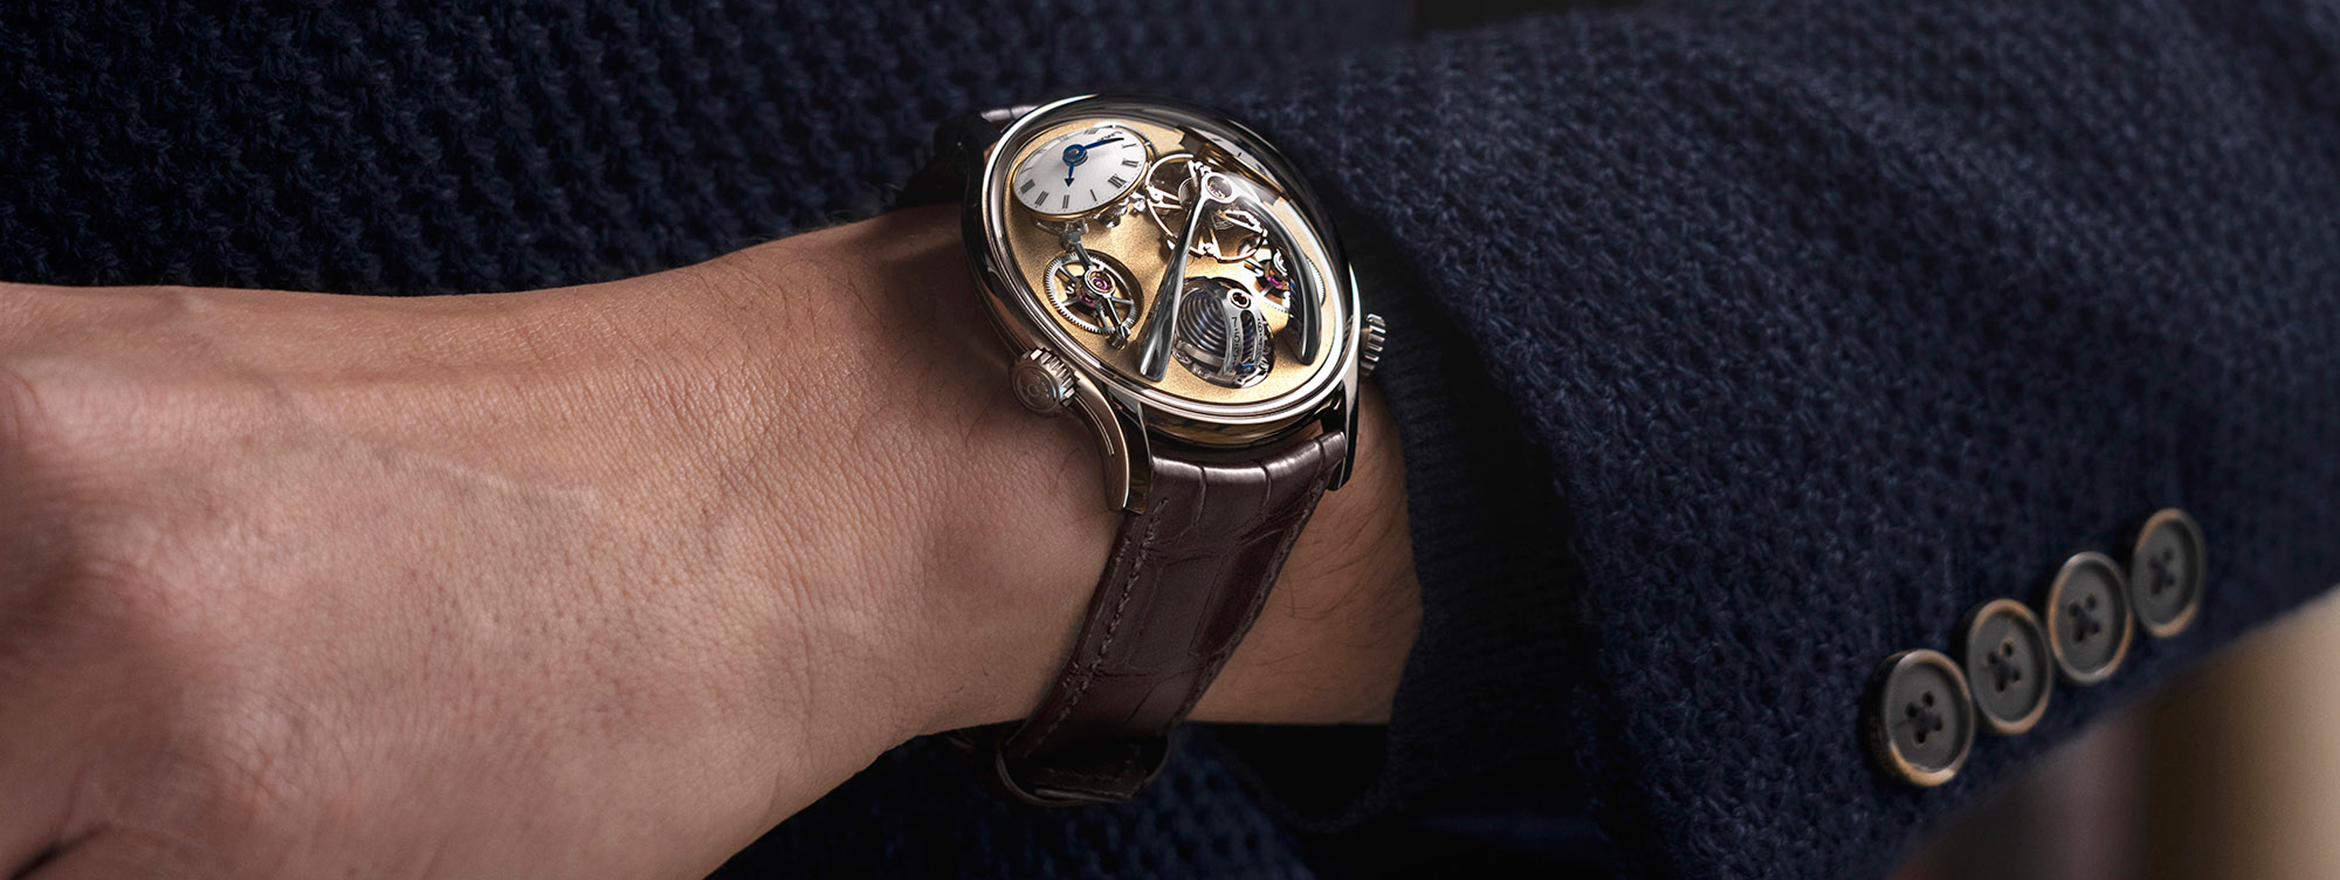 MB&F Presents the LMX in Steel and Brass